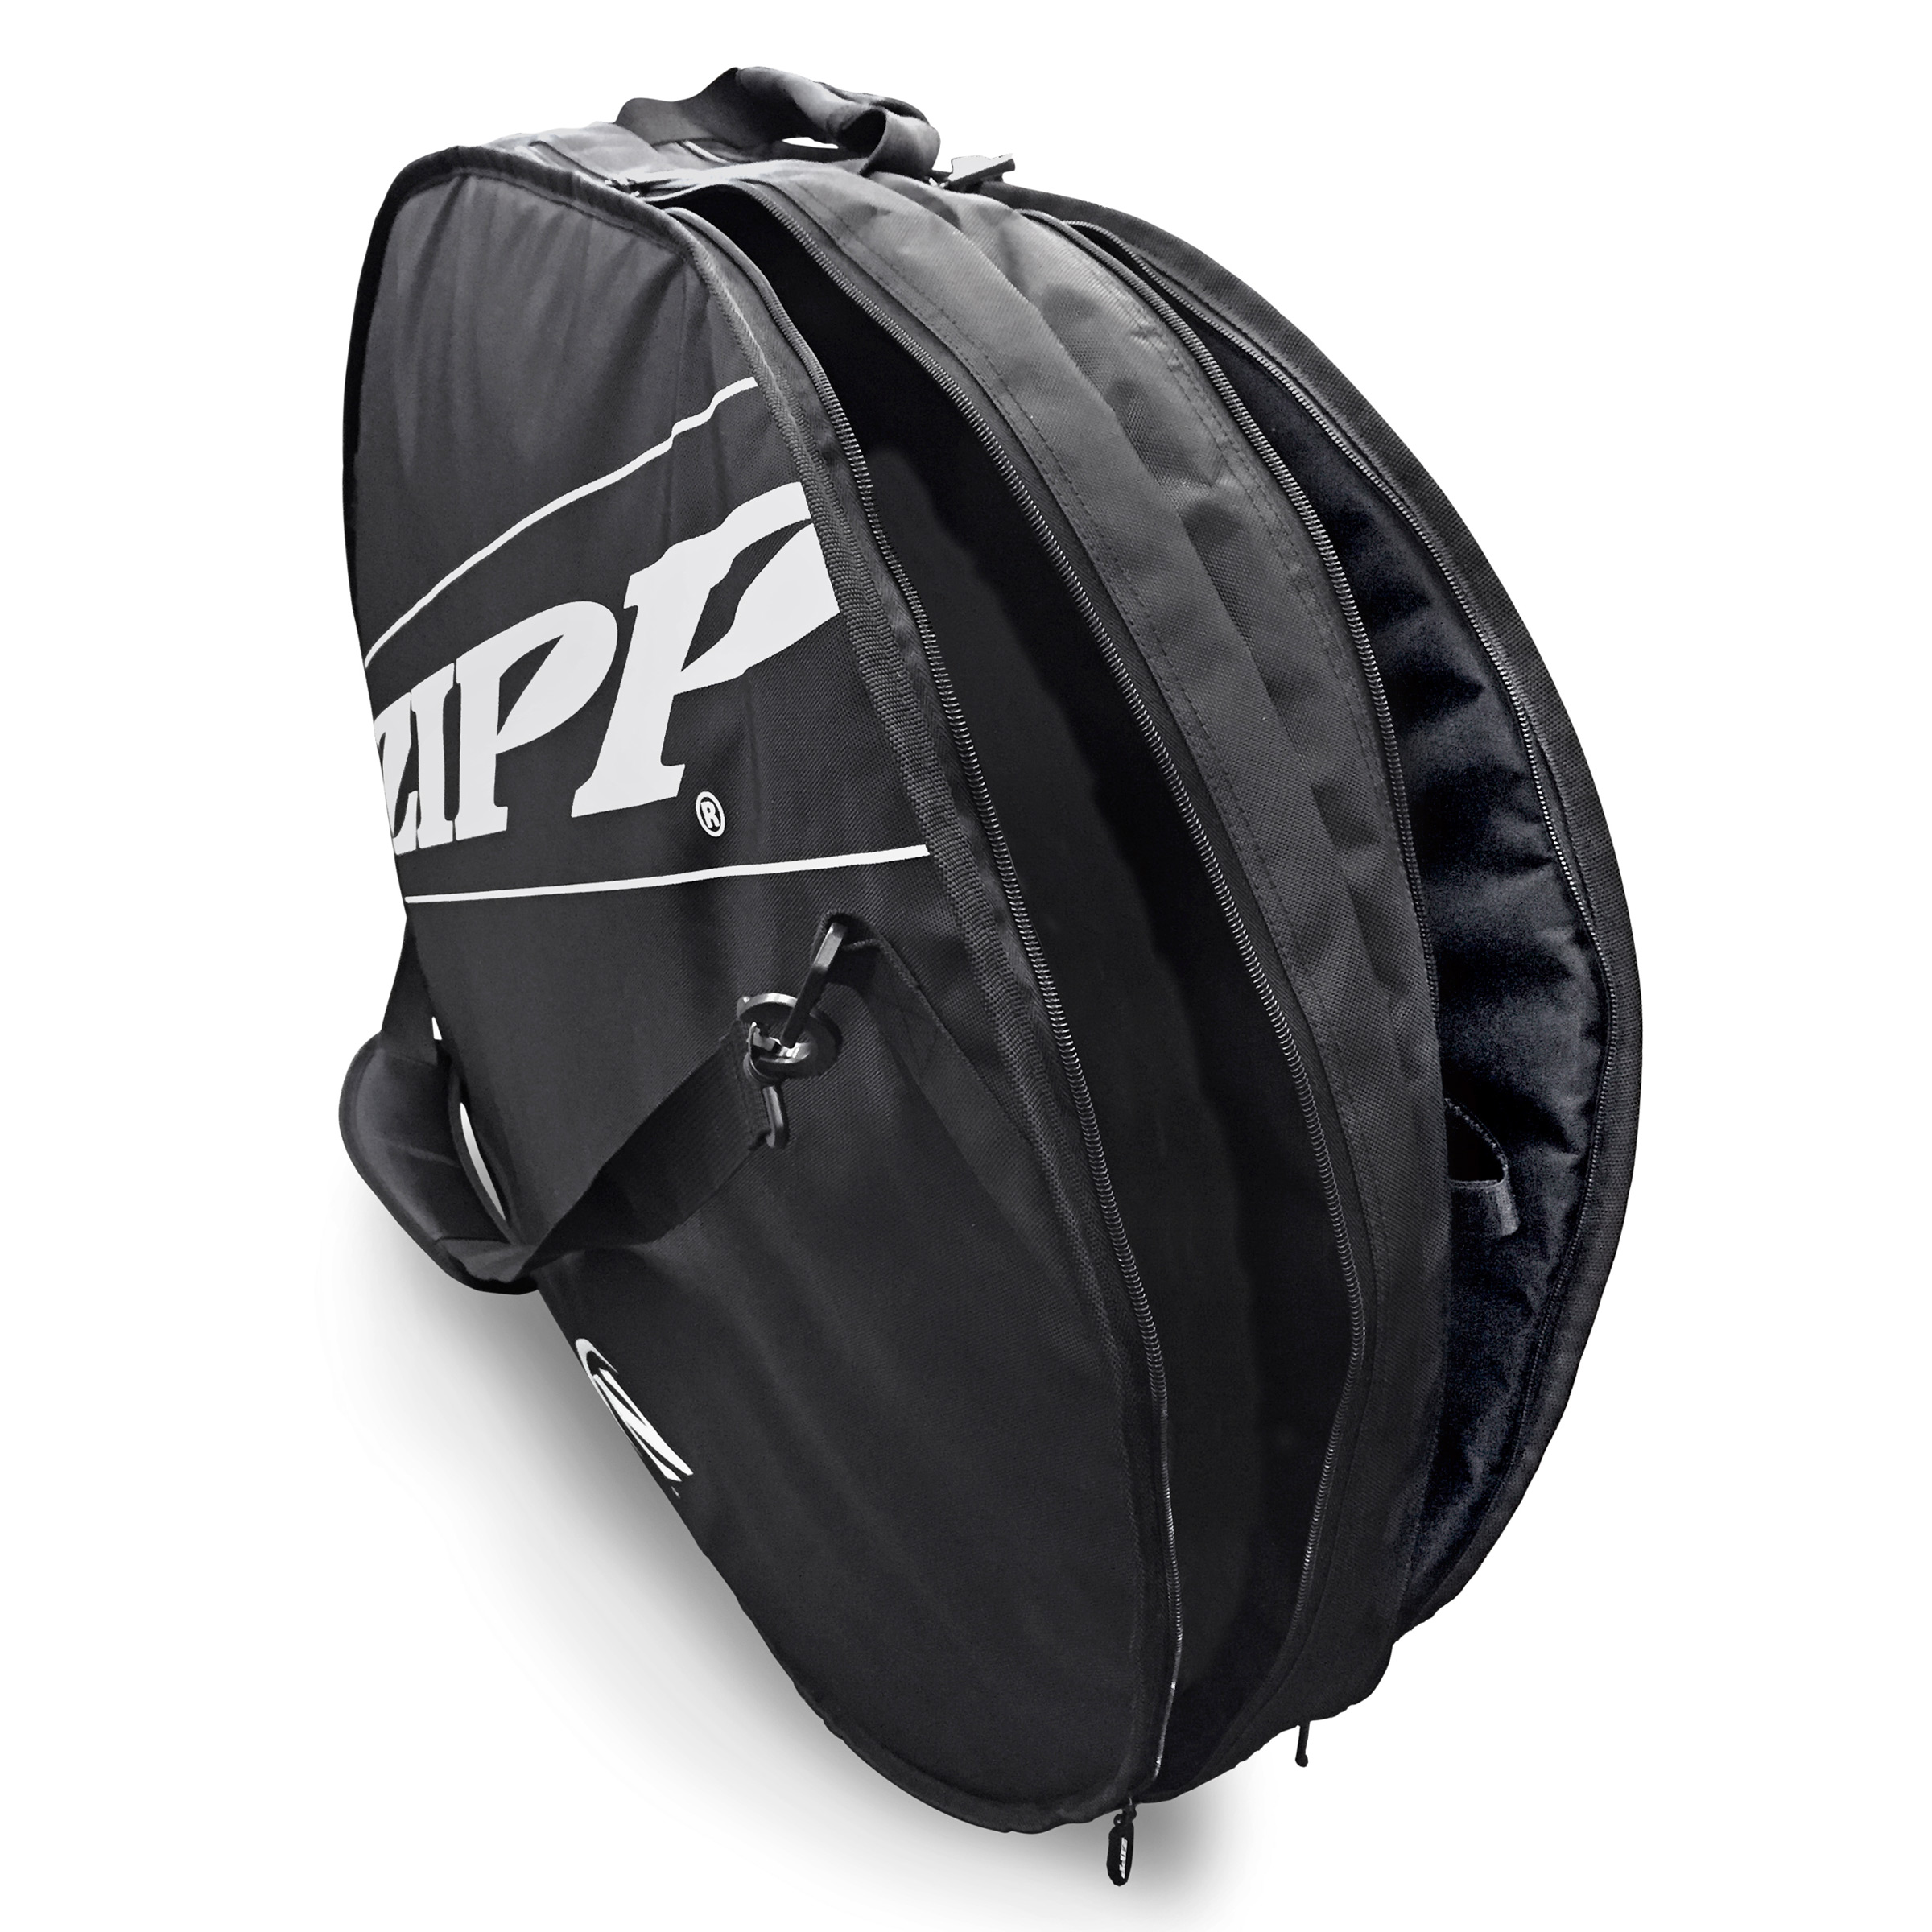 Tote your 454s in style with Zipp Double Soft wheel bag